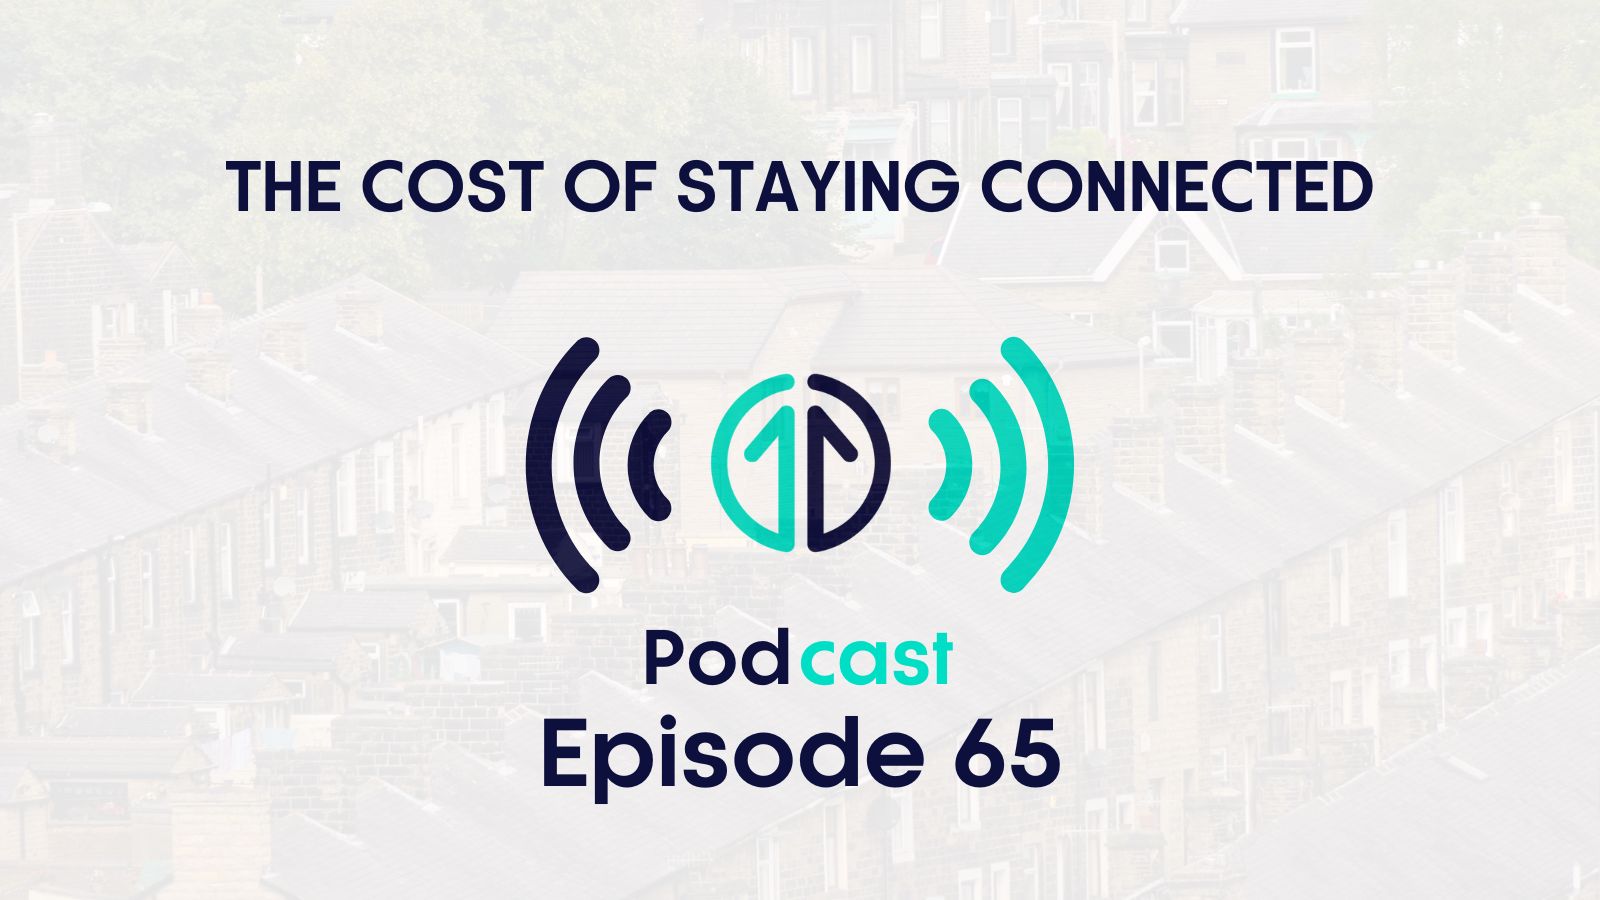 Podcast image for cost of living episode